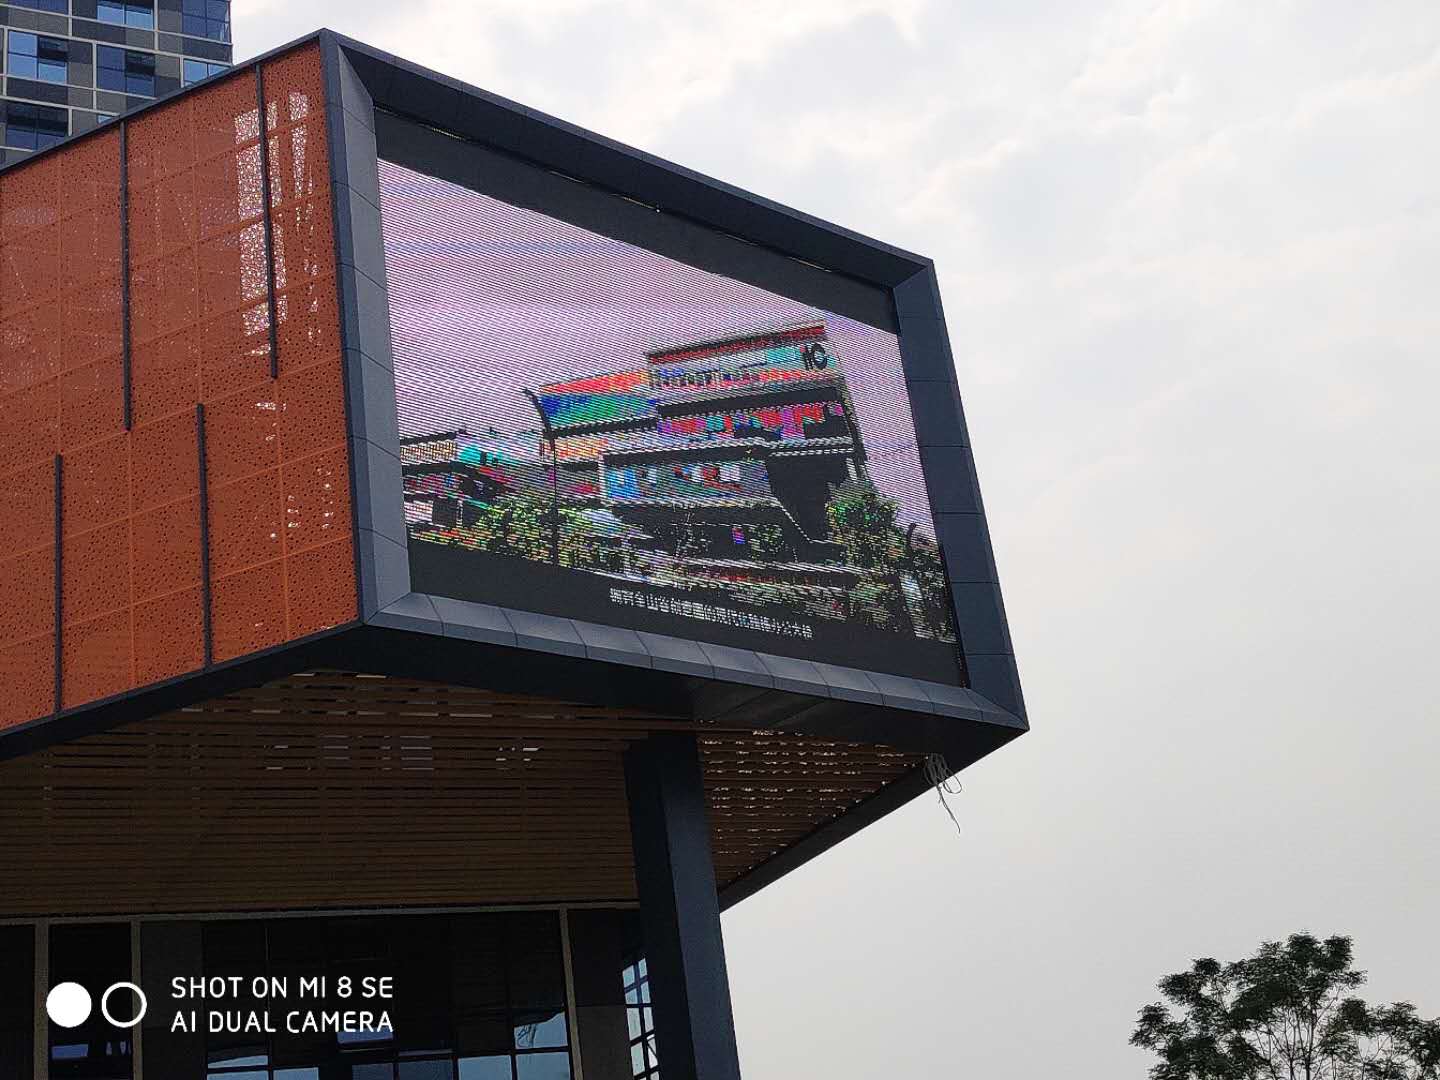 How to avoid water leakage when installing LED screen outdoor?